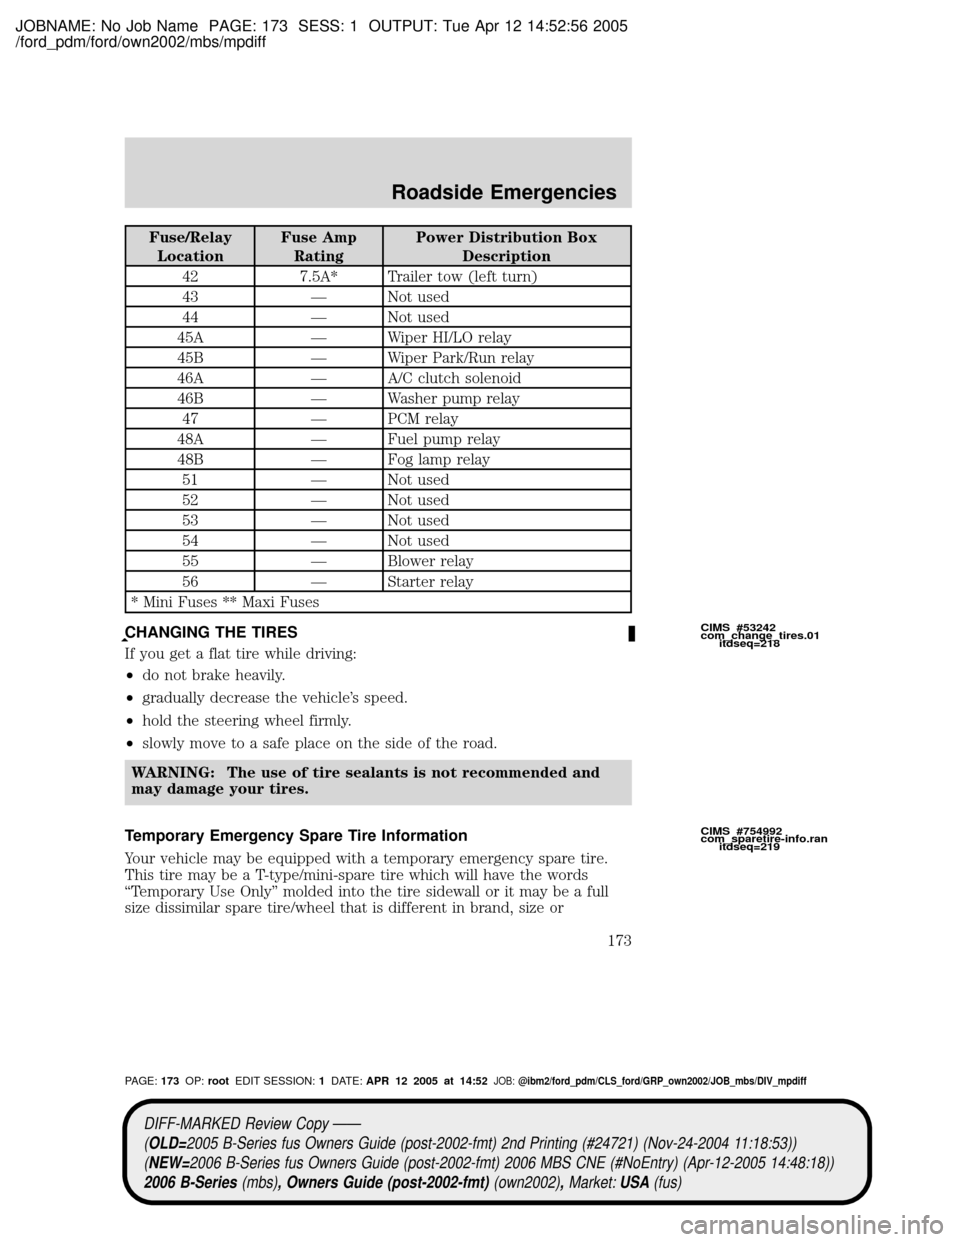 MAZDA MODEL B2300 TRUCK 2006  Owners Manual (in English) JOBNAME: No Job Name PAGE: 173 SESS: 1 OUTPUT: Tue Apr 12 14:52:56 2005
/ford_pdm/ford/own2002/mbs/mpdiff
Fuse/Relay
LocationFuse Amp
RatingPower Distribution Box
Description
42 7.5A* Trailer tow (lef